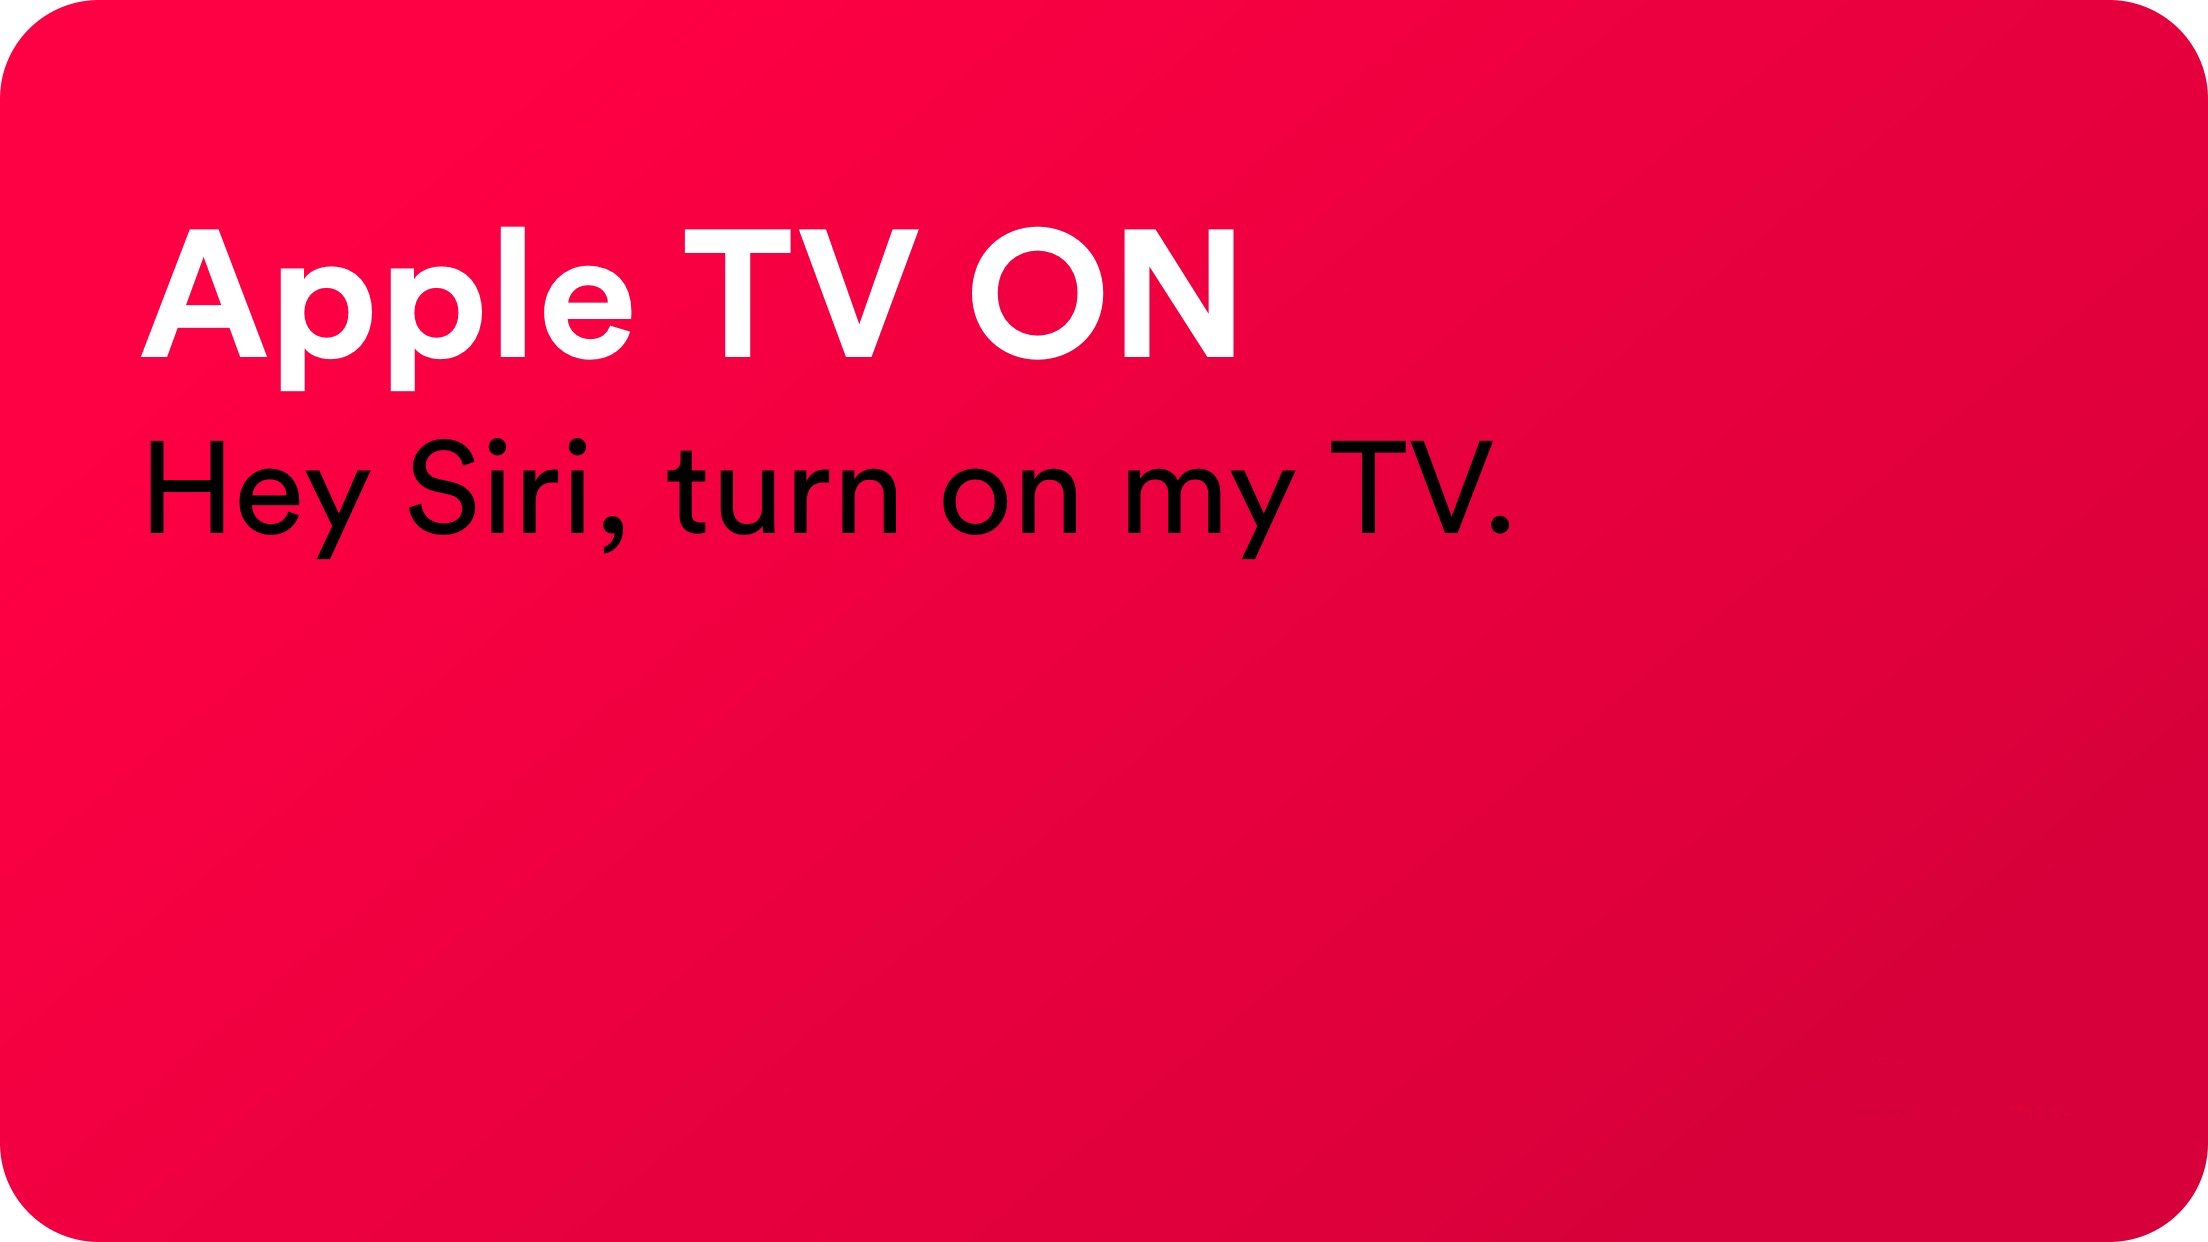 iOS automation workflows — how to turn on your Apple TV with a custom Siri phrase